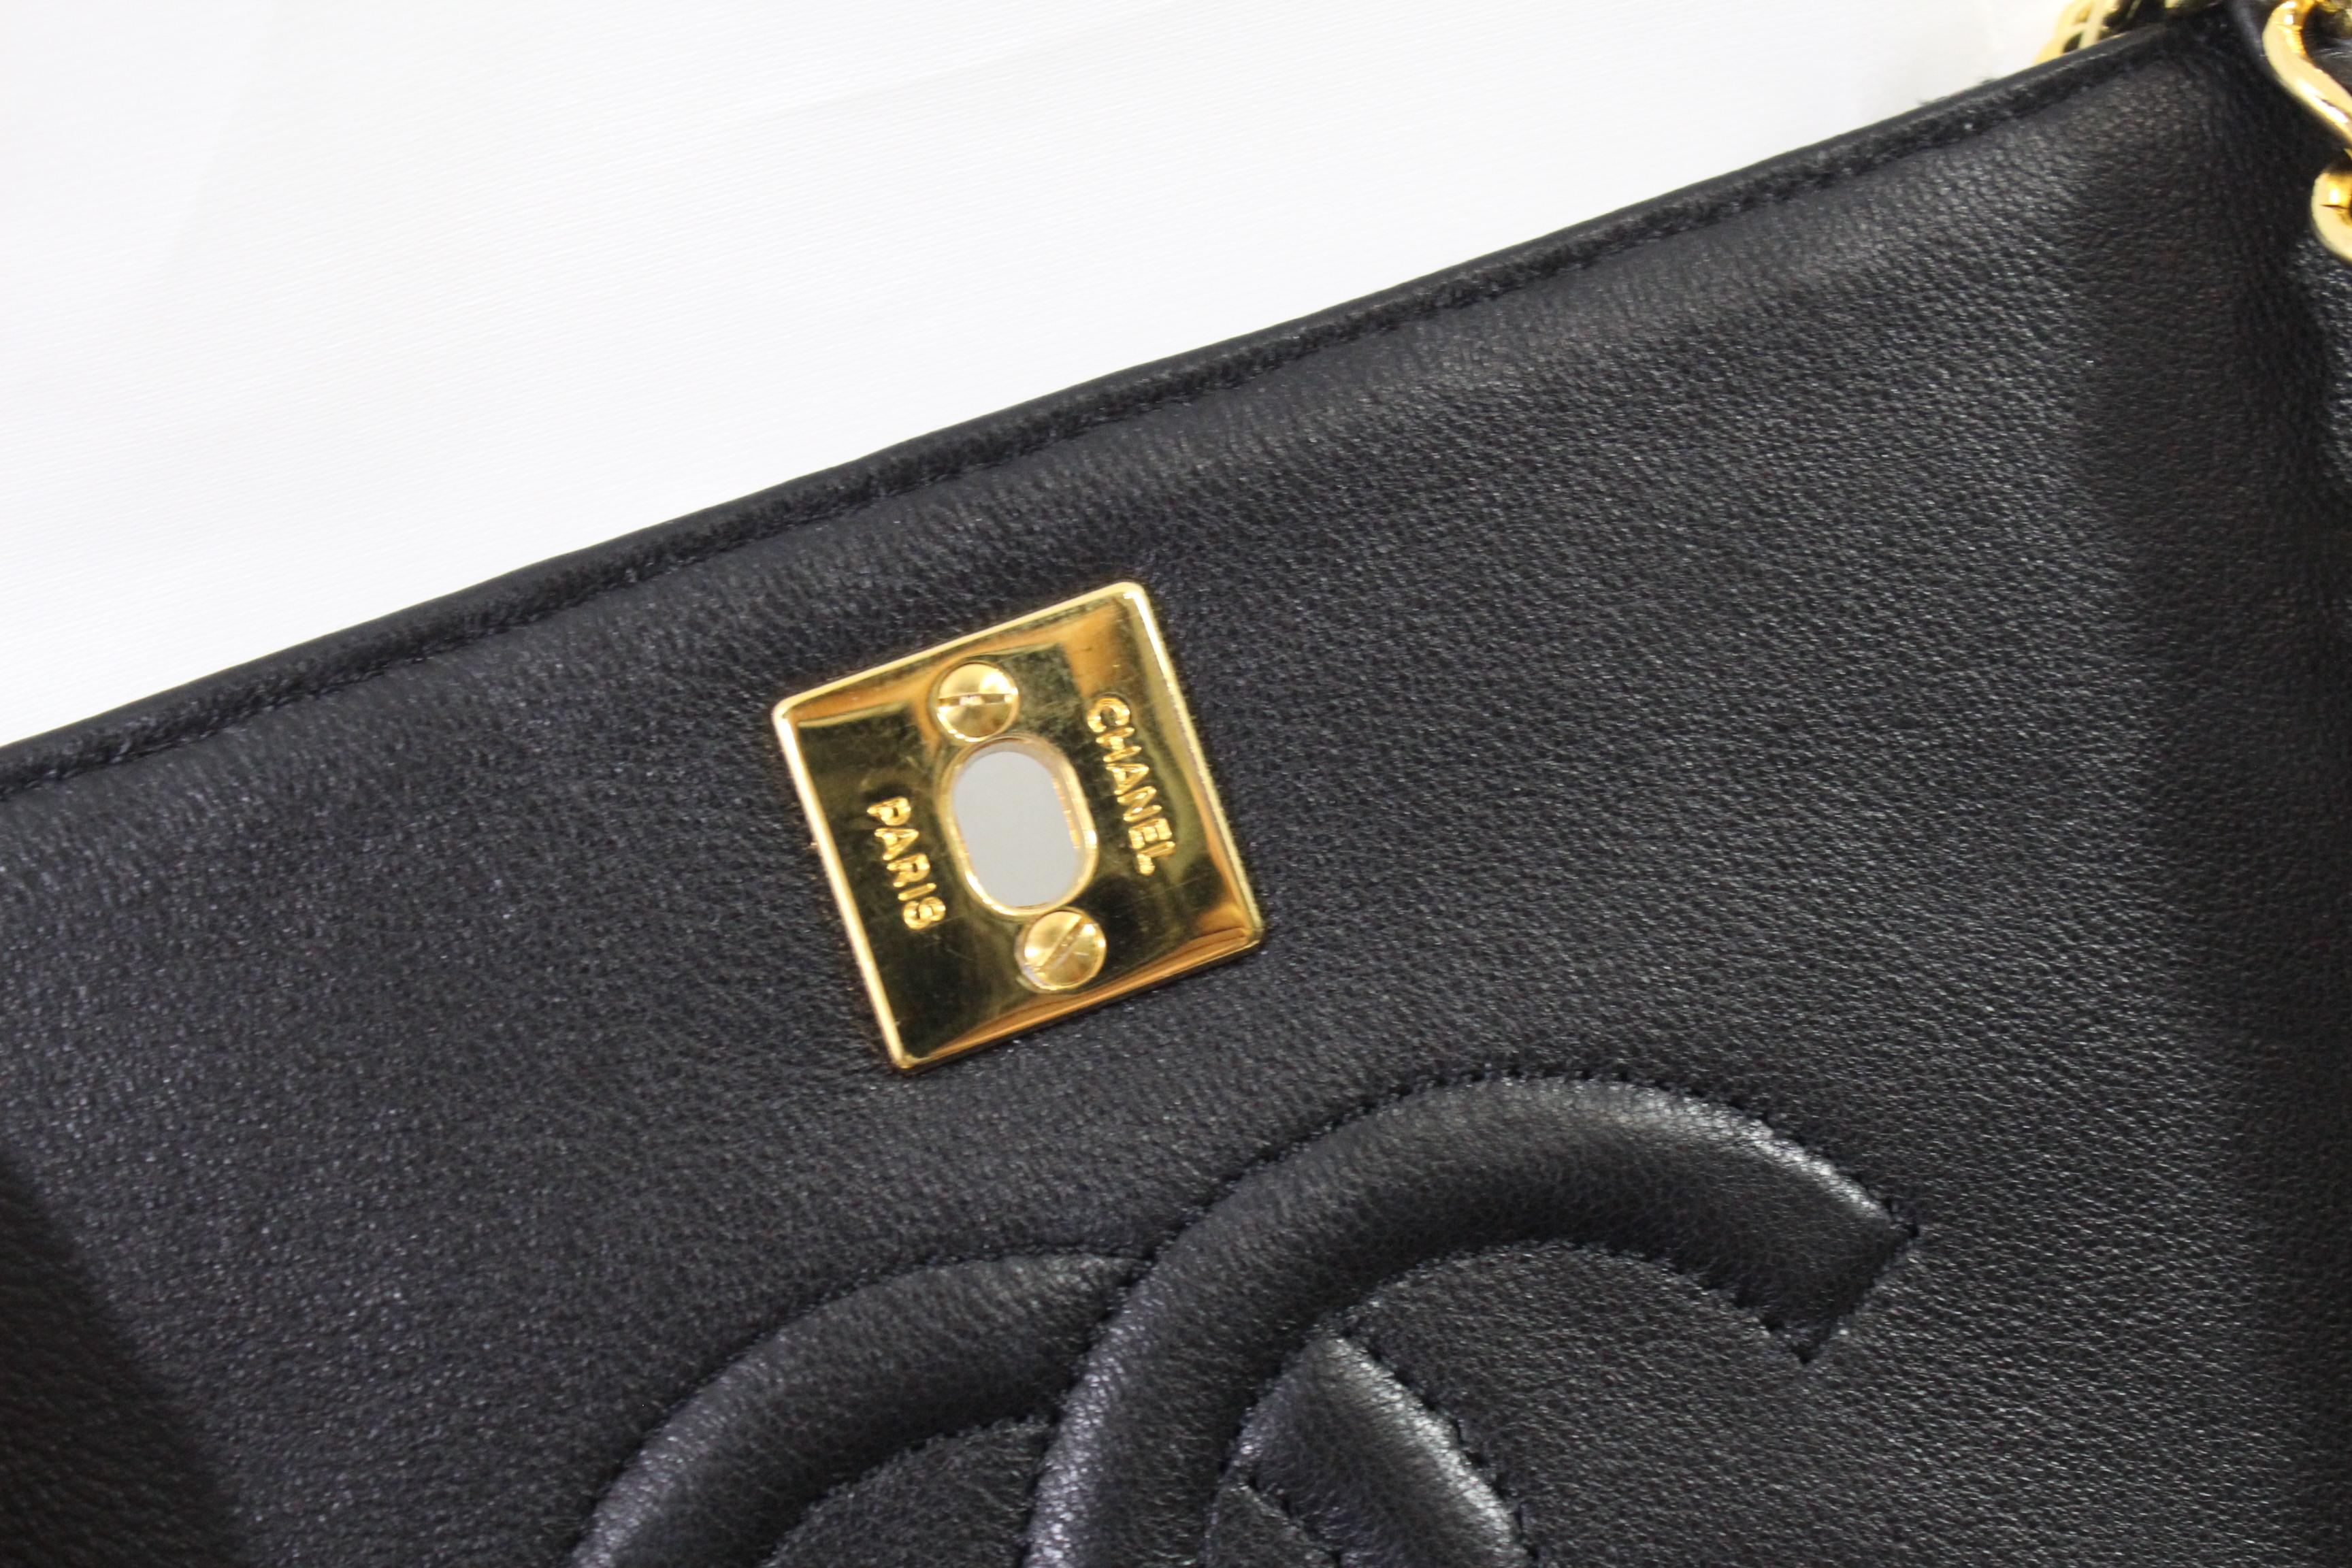 Chanel mini vintage lezard bag with golden hardware.

bag hardly use so excellent condition
Size 20x12 cm